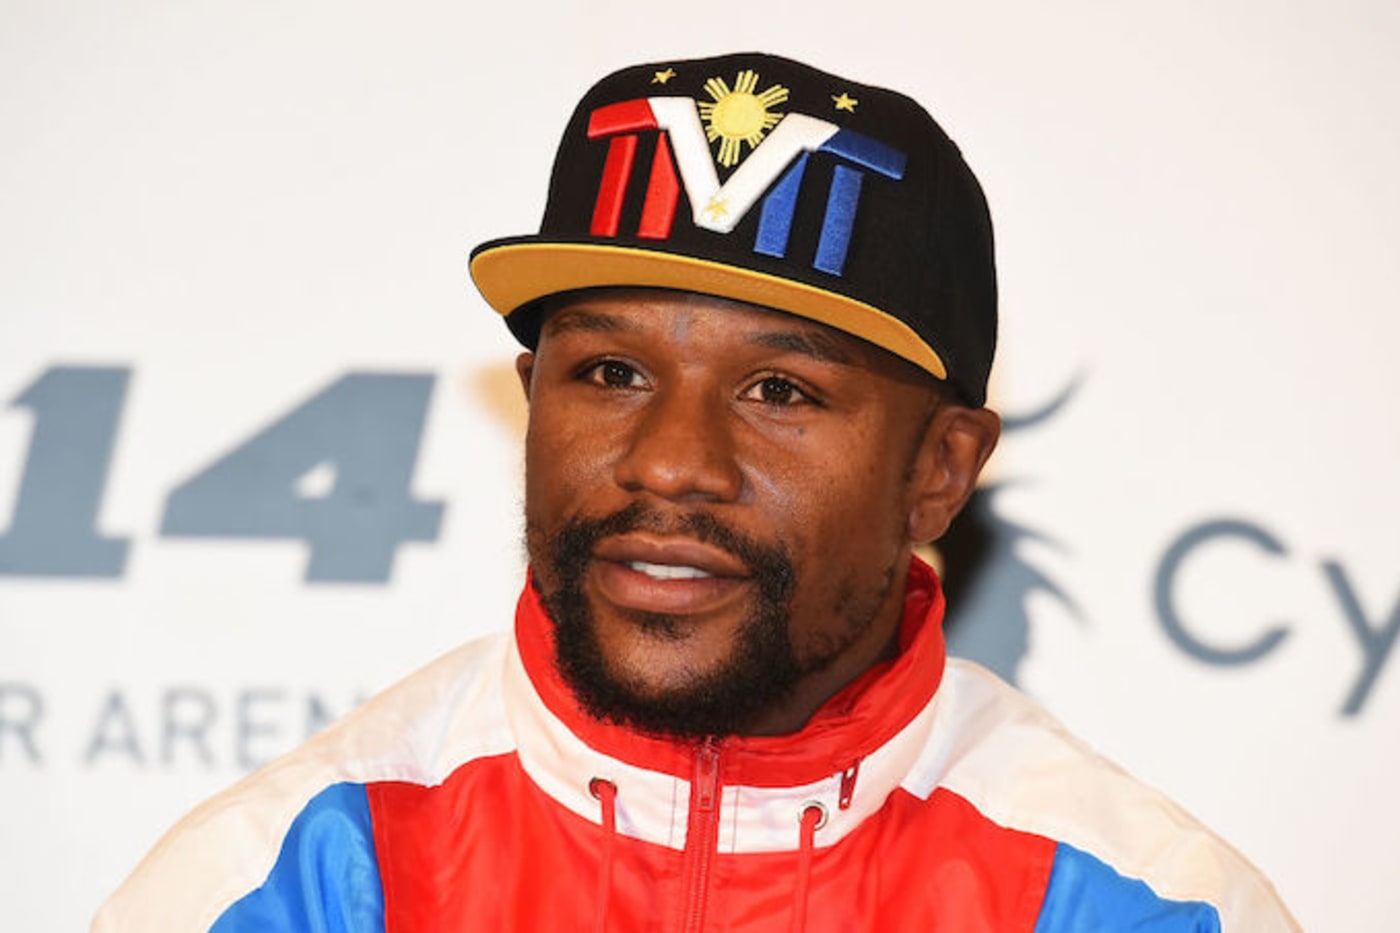 This is a picture of Floyd Mayweather.